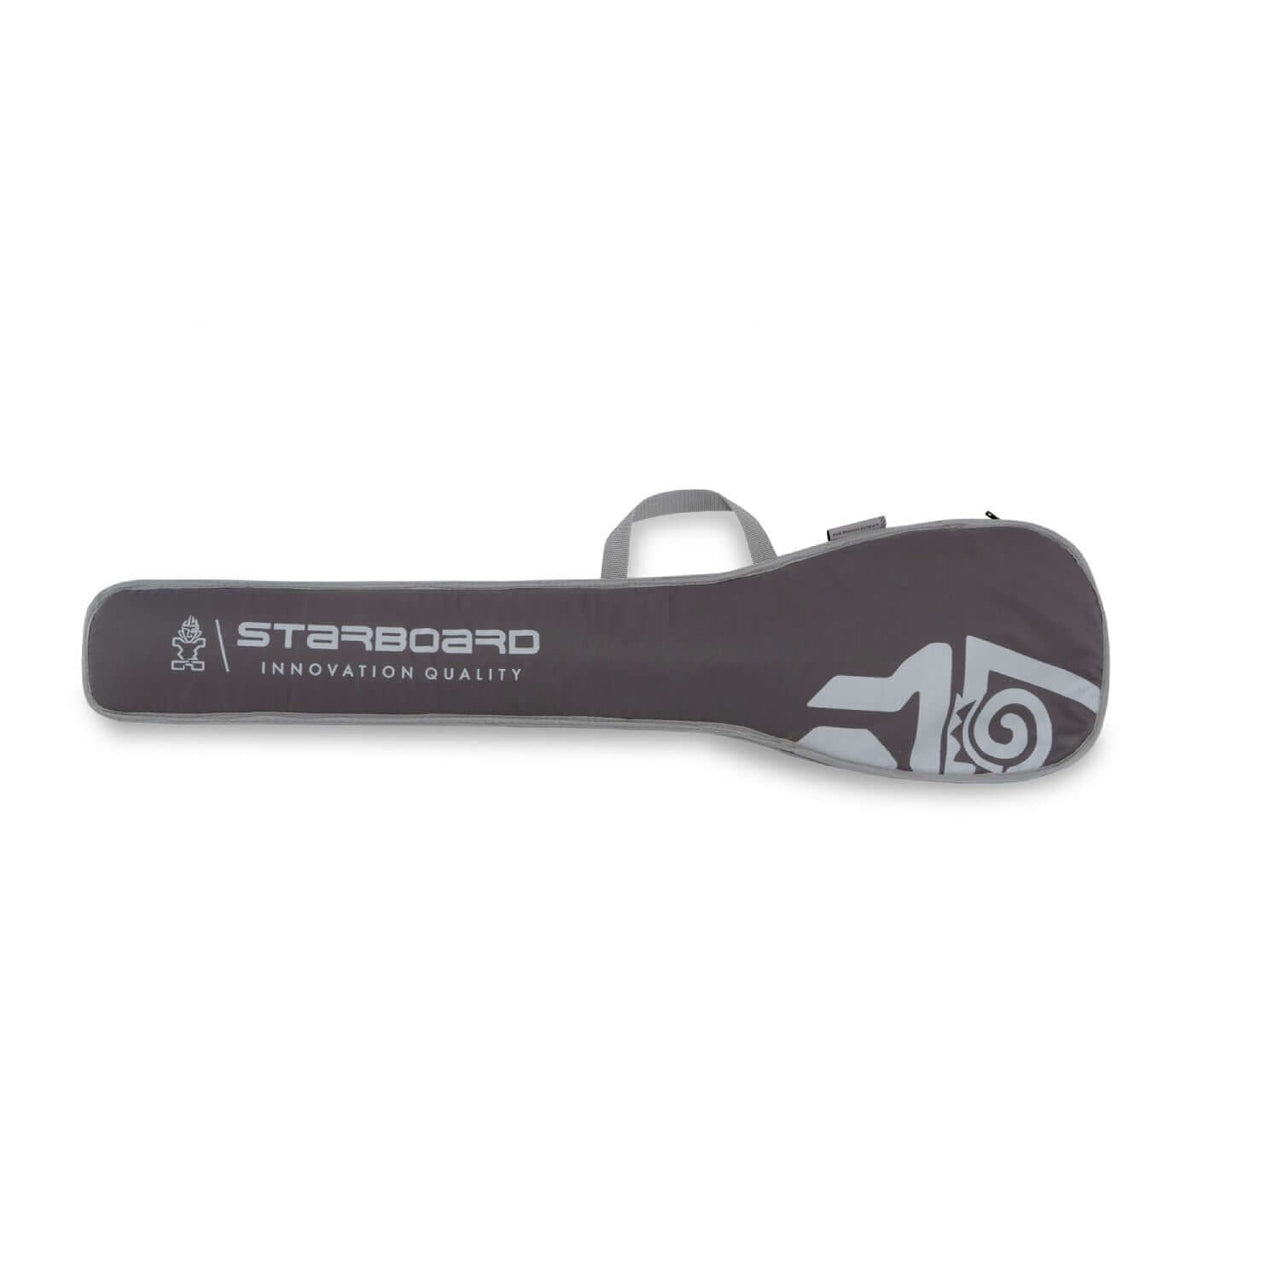 Starboard SB24 3 PIECE PADDLE SOFT BAG – SUP Tasche